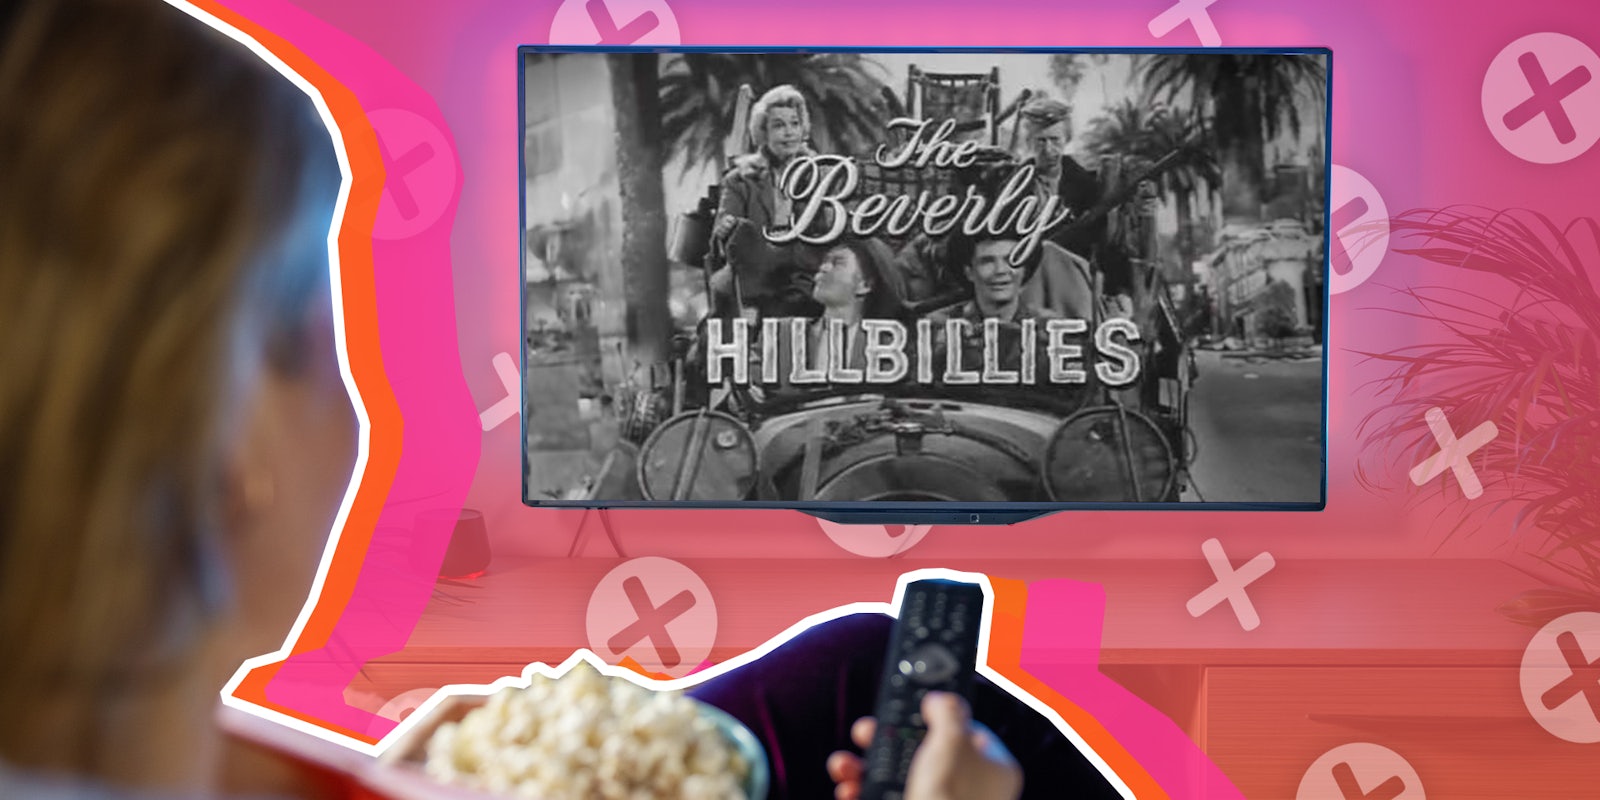 beverly hillbillies cbs show being shown on tv screen with woman watching